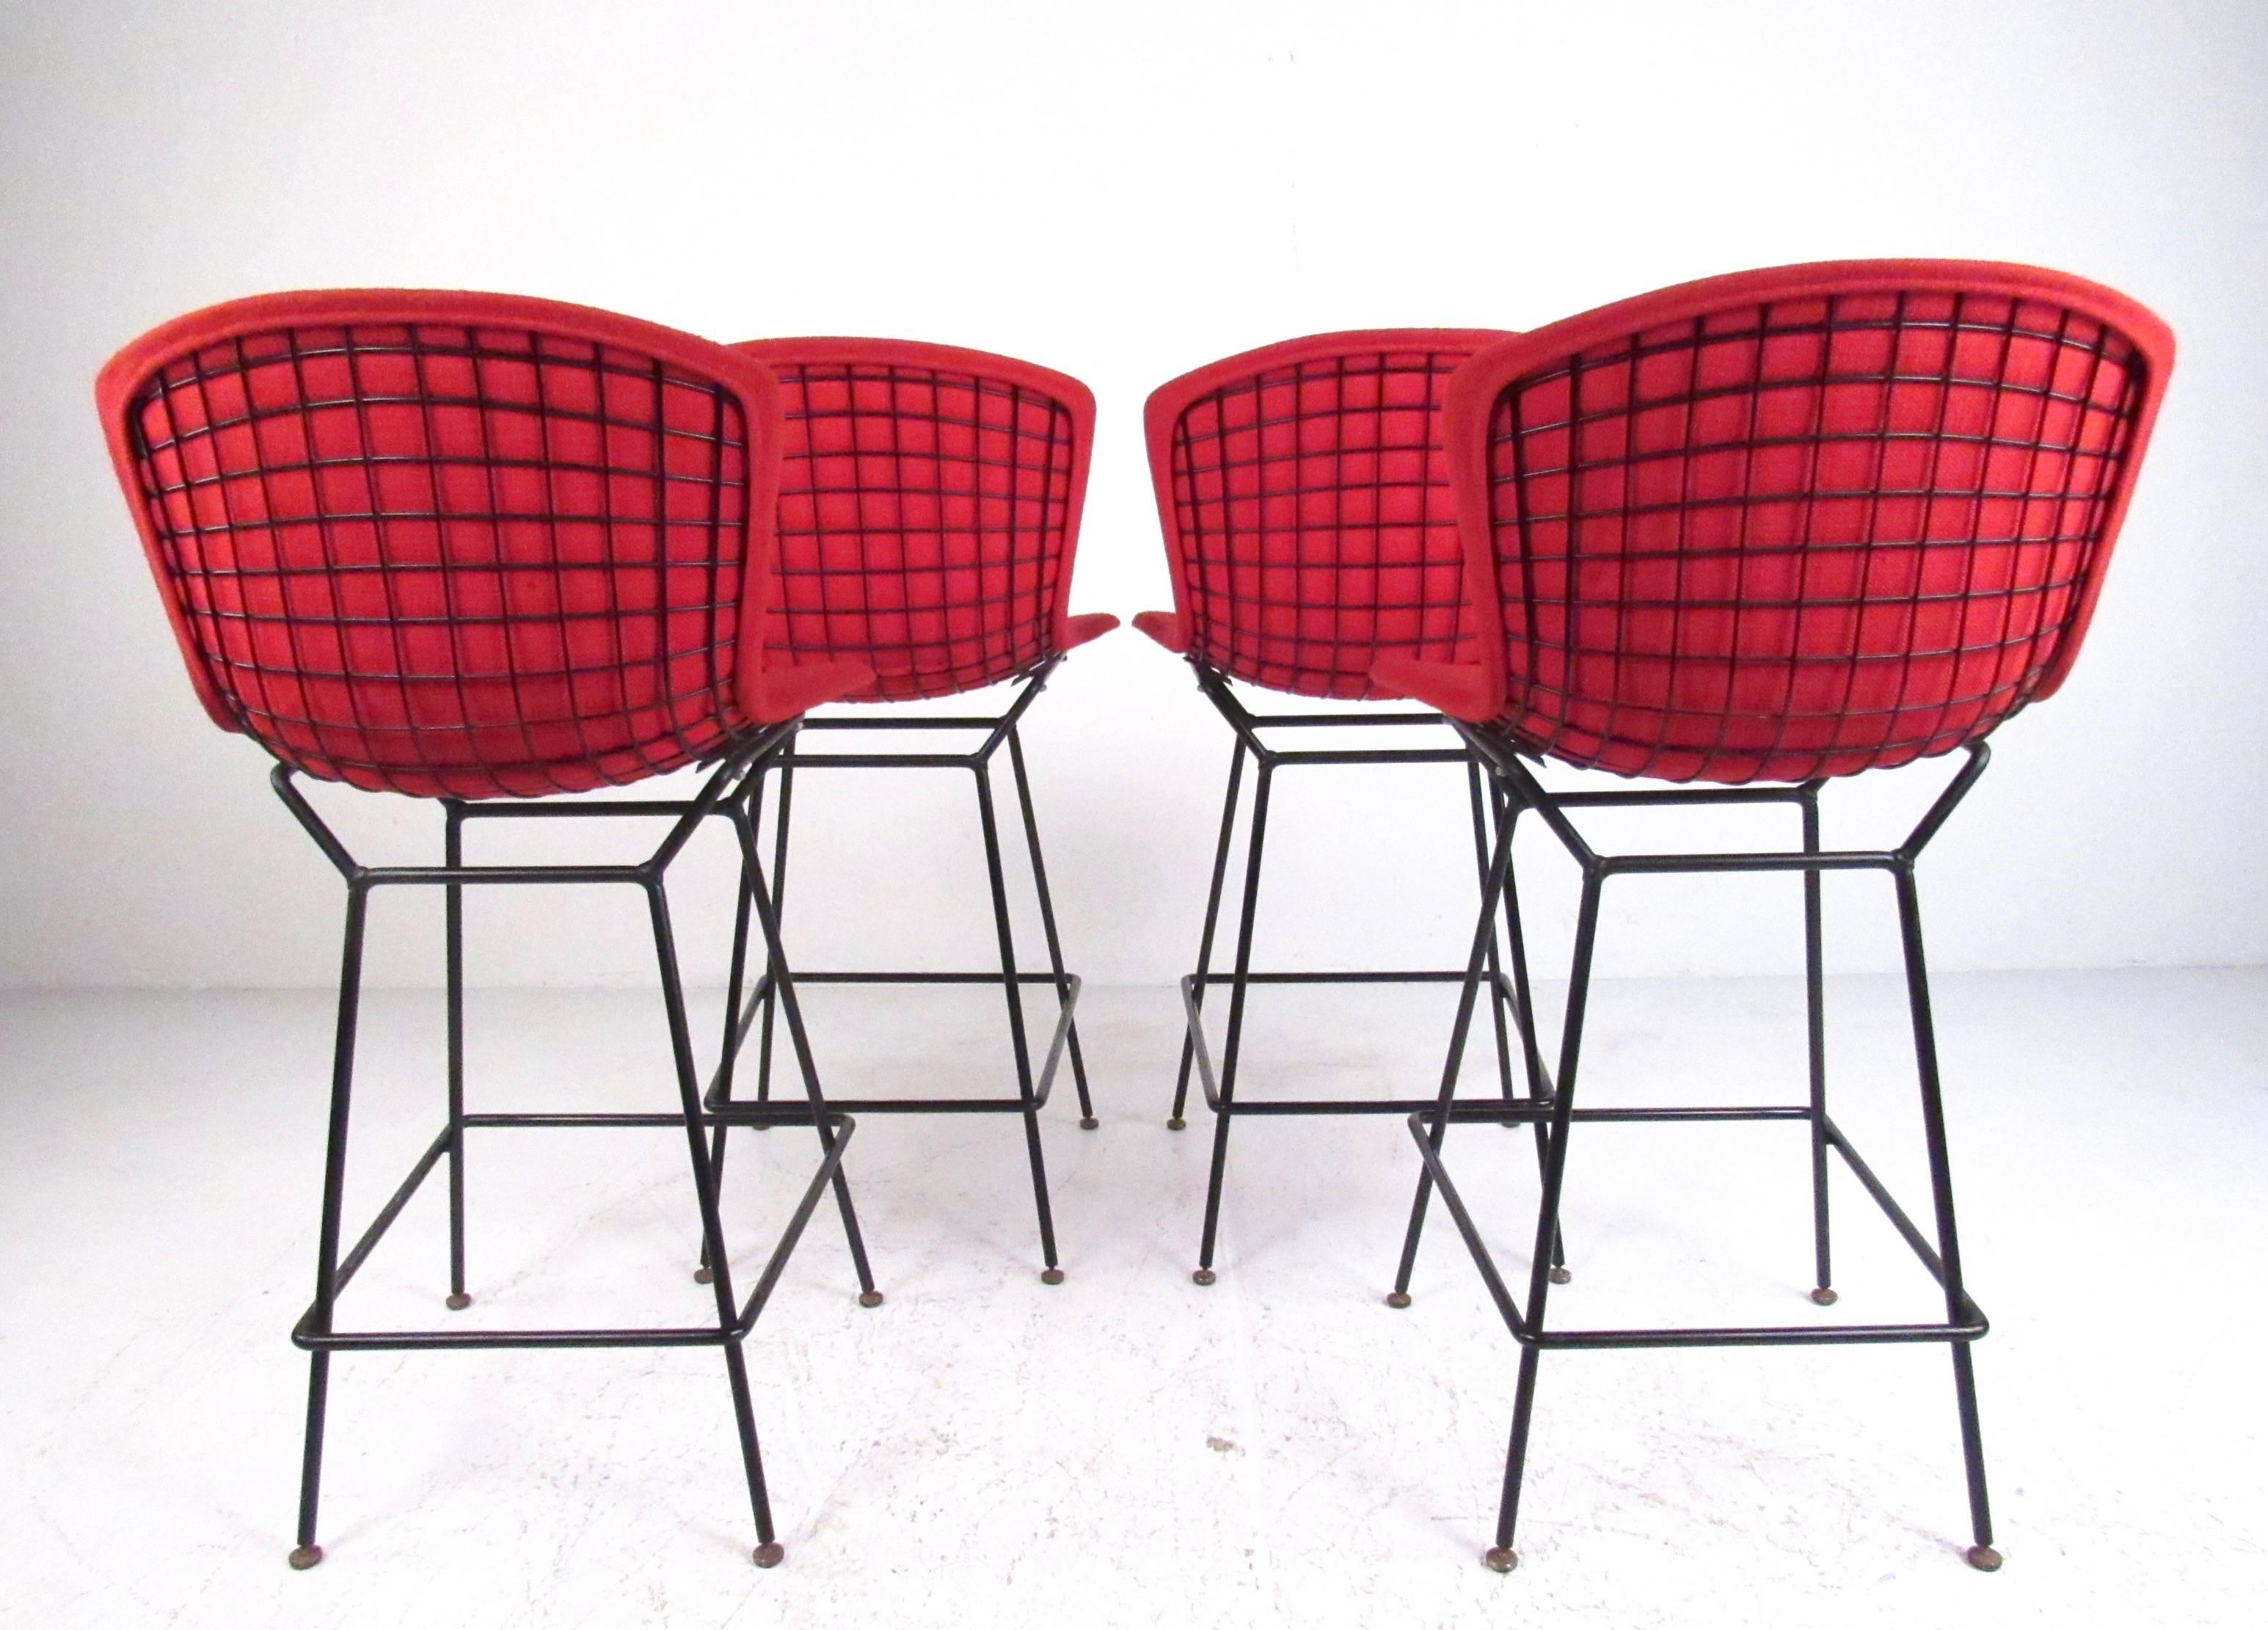 American Set of Steel Wire Barstools by Harry Bertoia for Knoll Associates